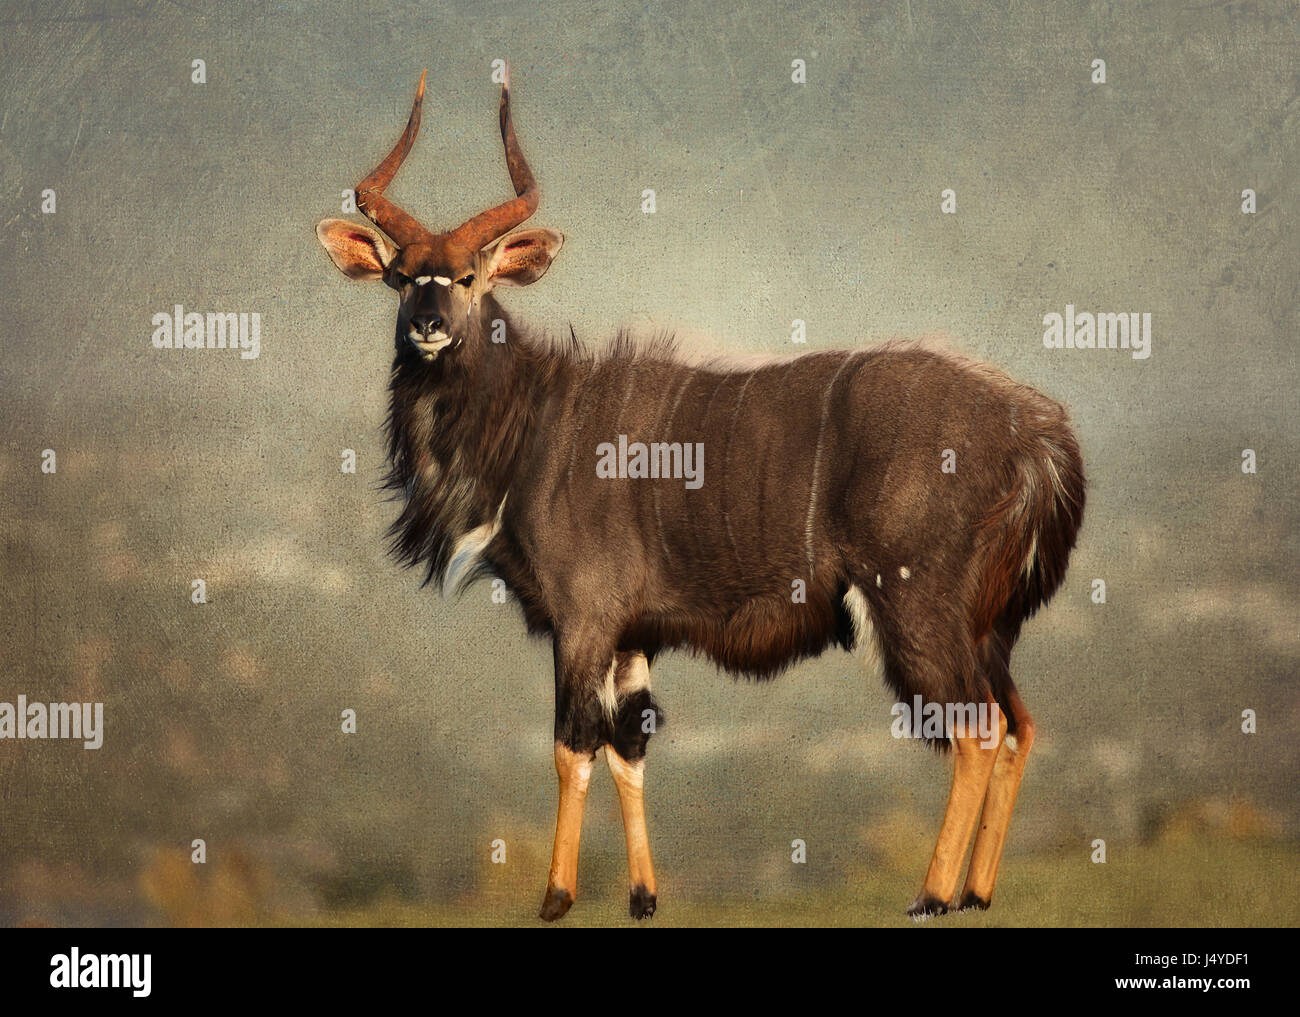 The Nyala is one of the most beautiful buck species in Africa. They are elegant and inquisitive. Stock Photo